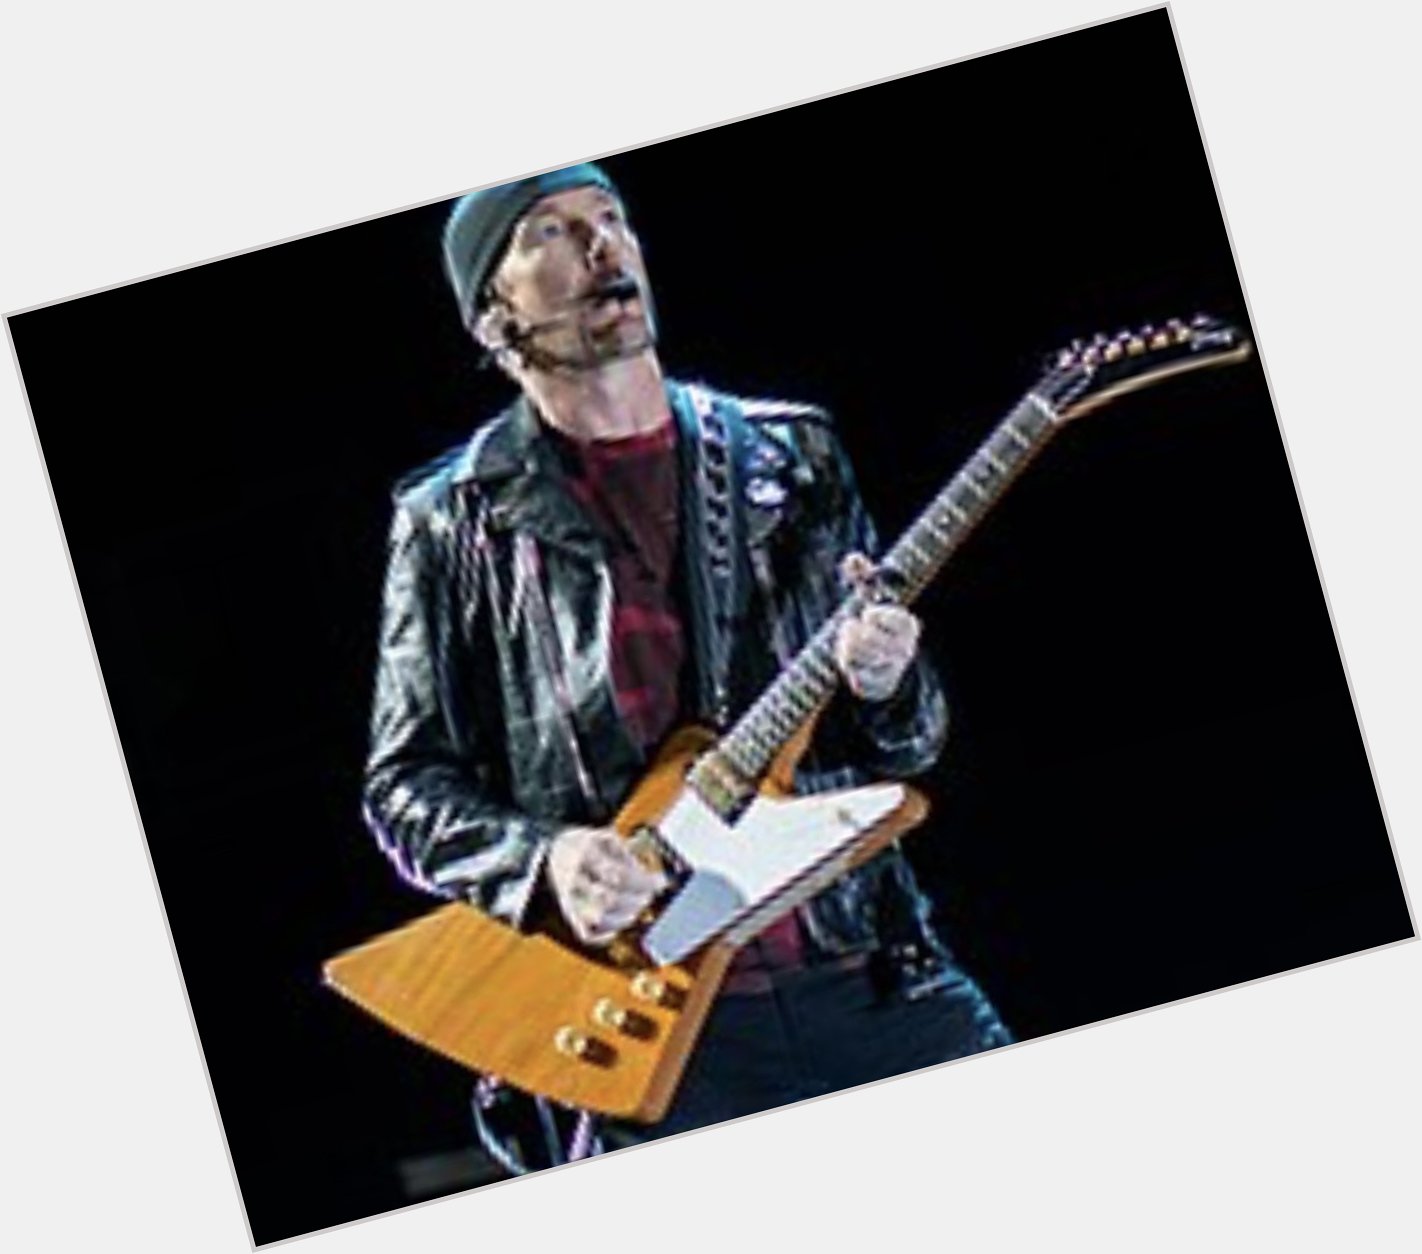 Happy birthday to The Edge of U2. What is your fav U2 song? 